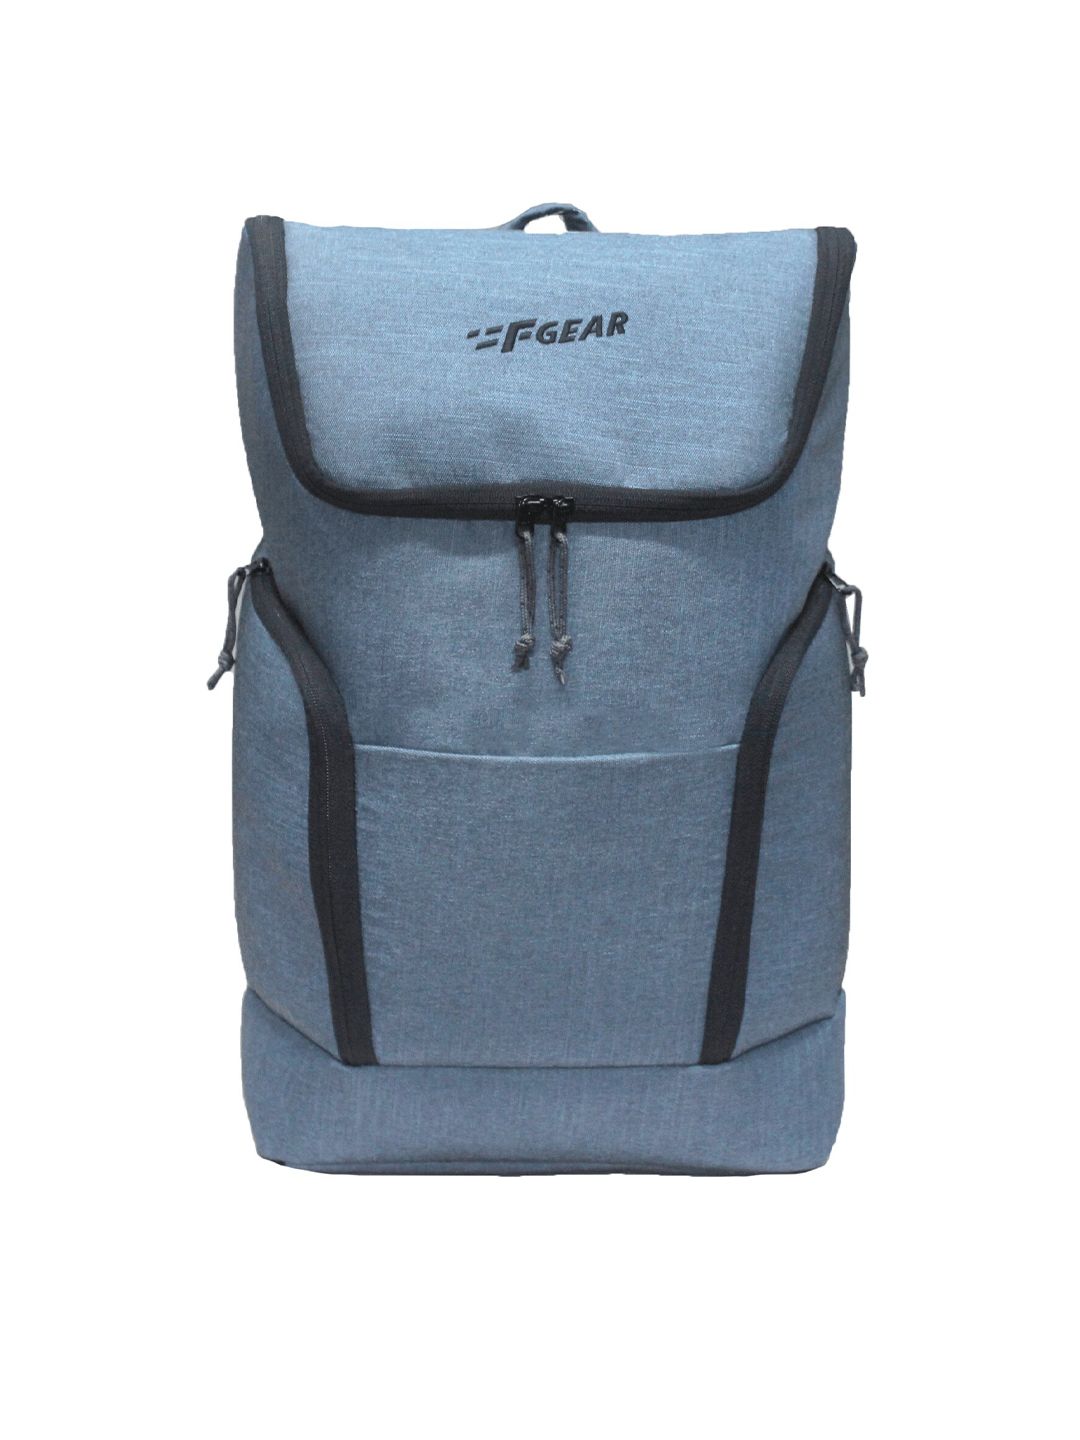 F Gear Unisex Blue & Grey 18 inch Backpack Price in India